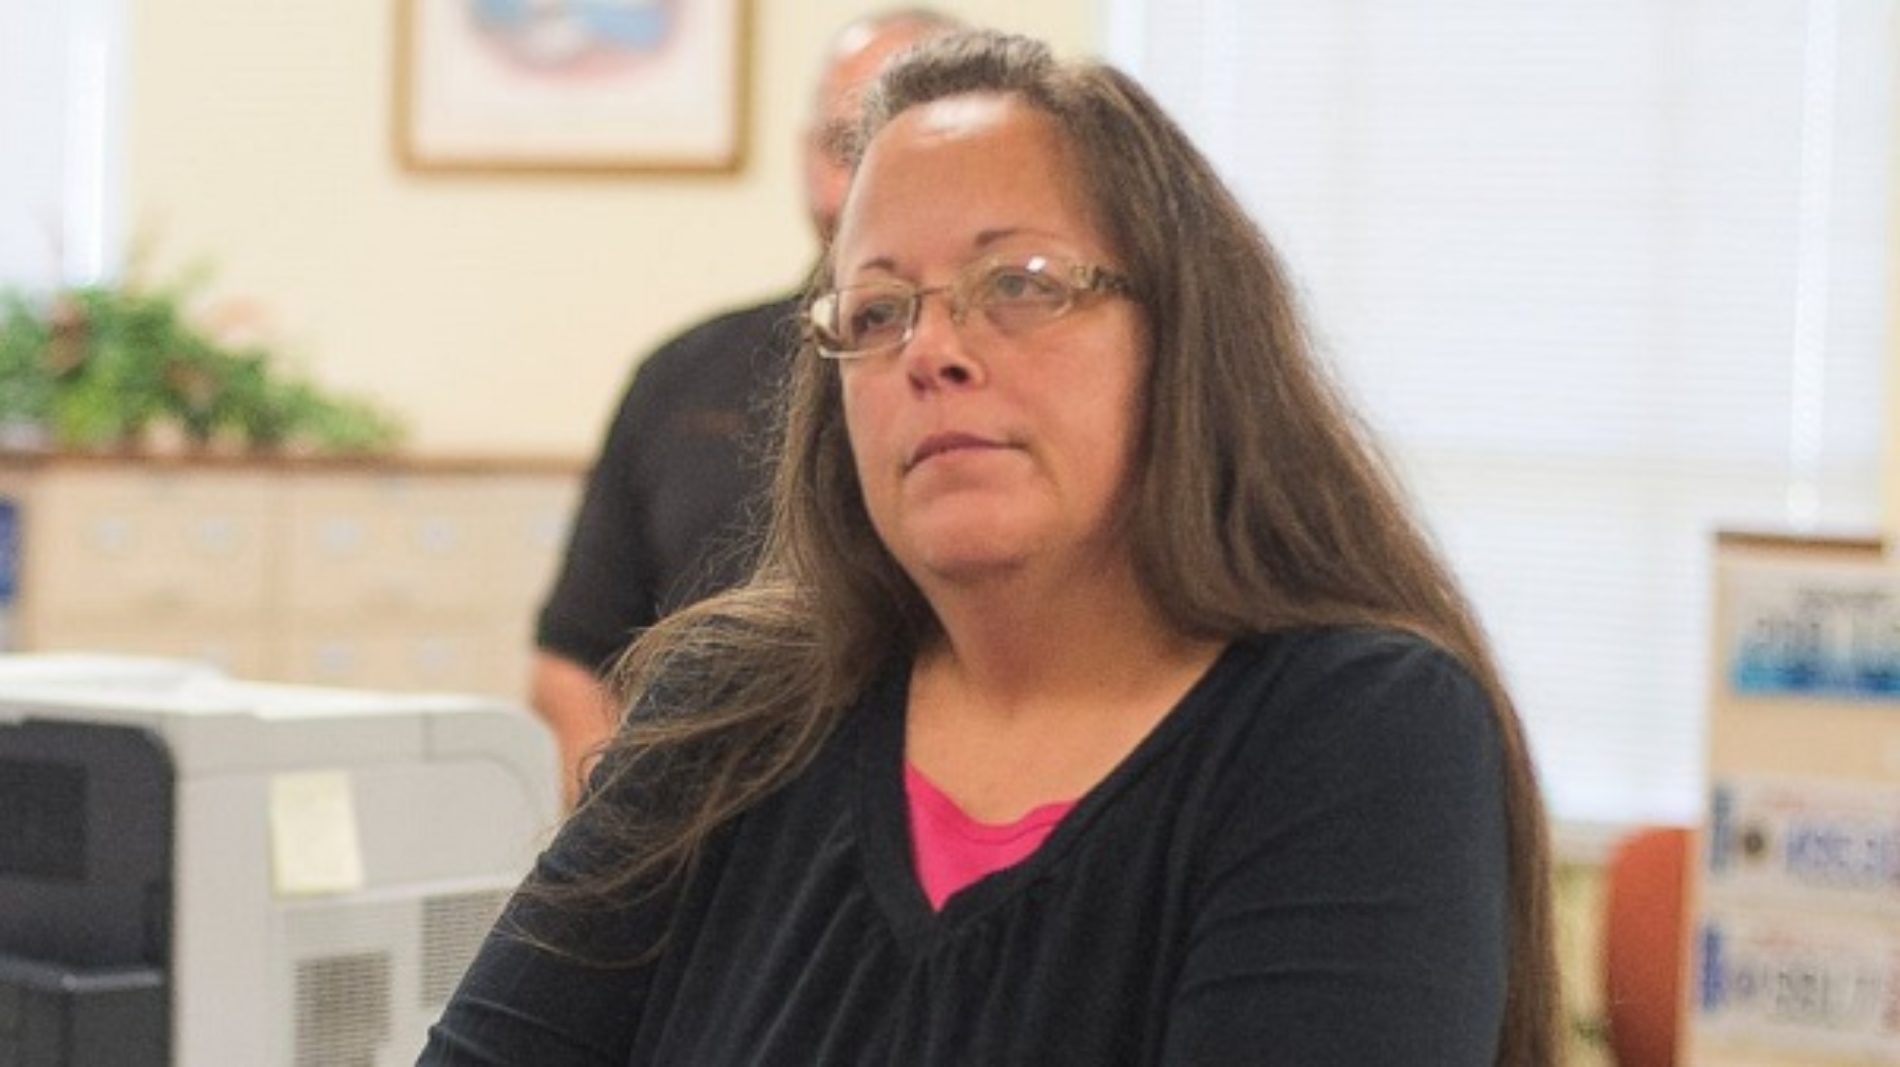 Westboro Baptist Church Sides With The LGBT Community On The Kim Davis Issue